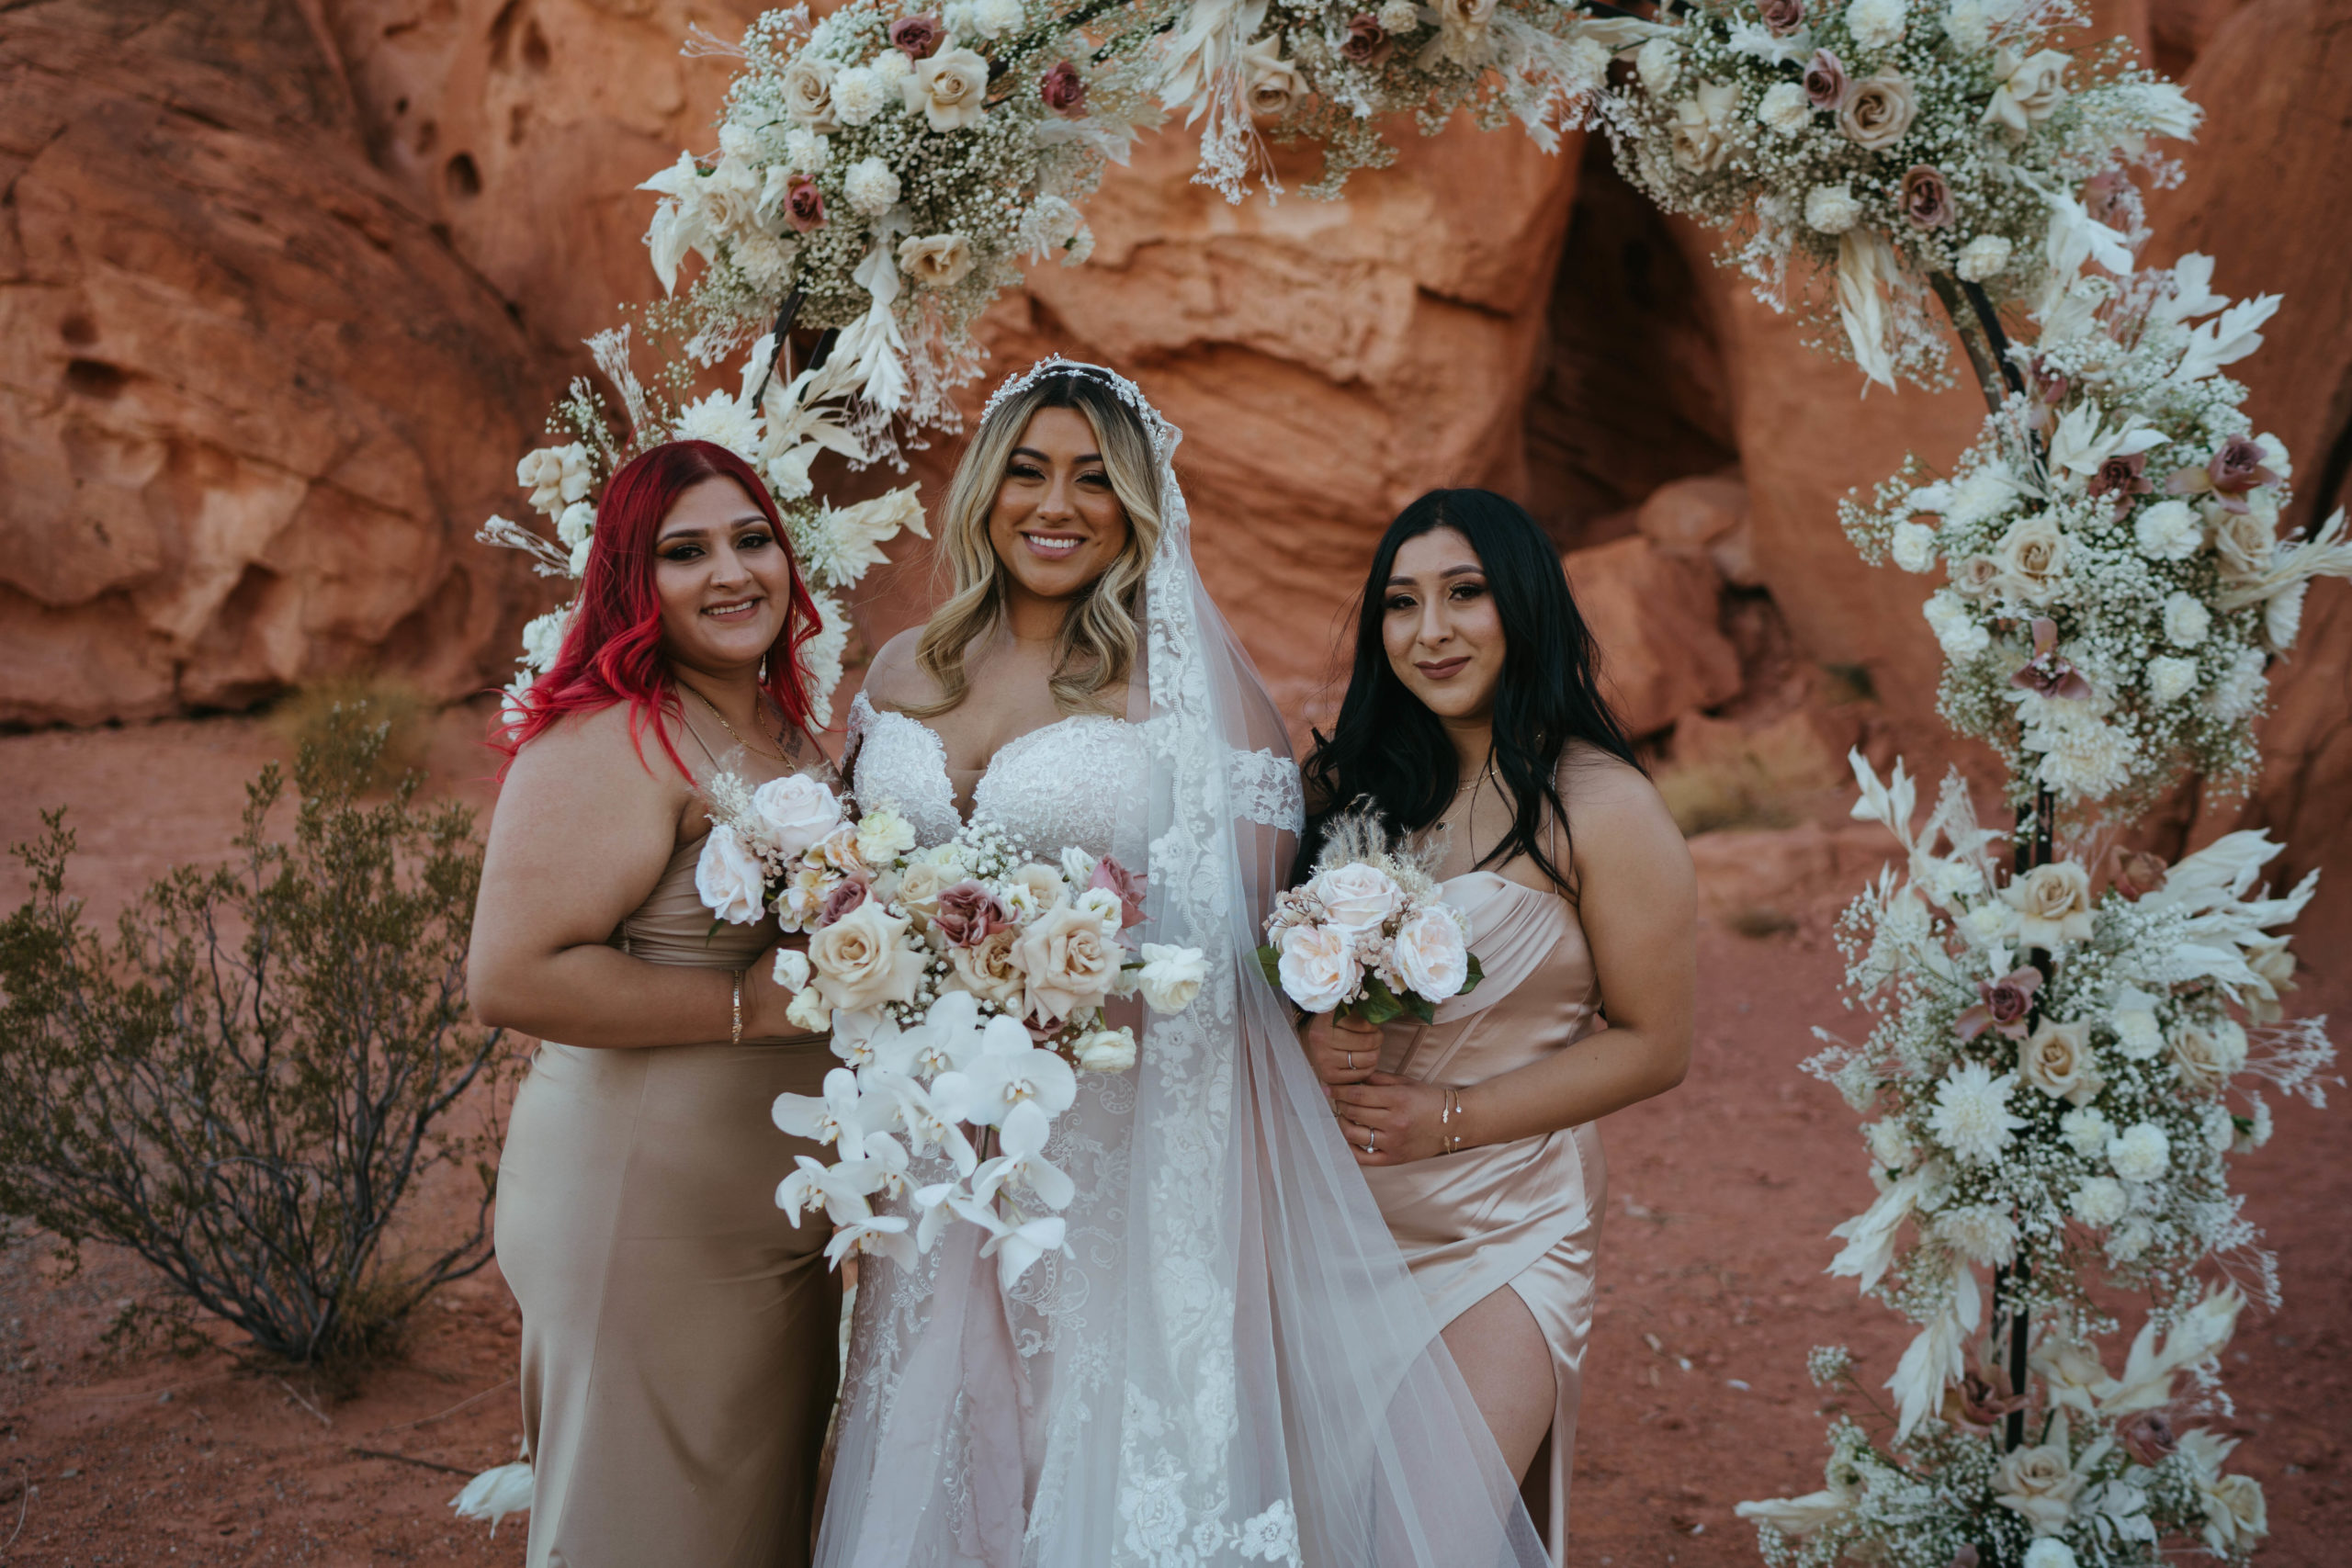 The bride posing with two of her bridesmaids in front of the floral arch in the desert